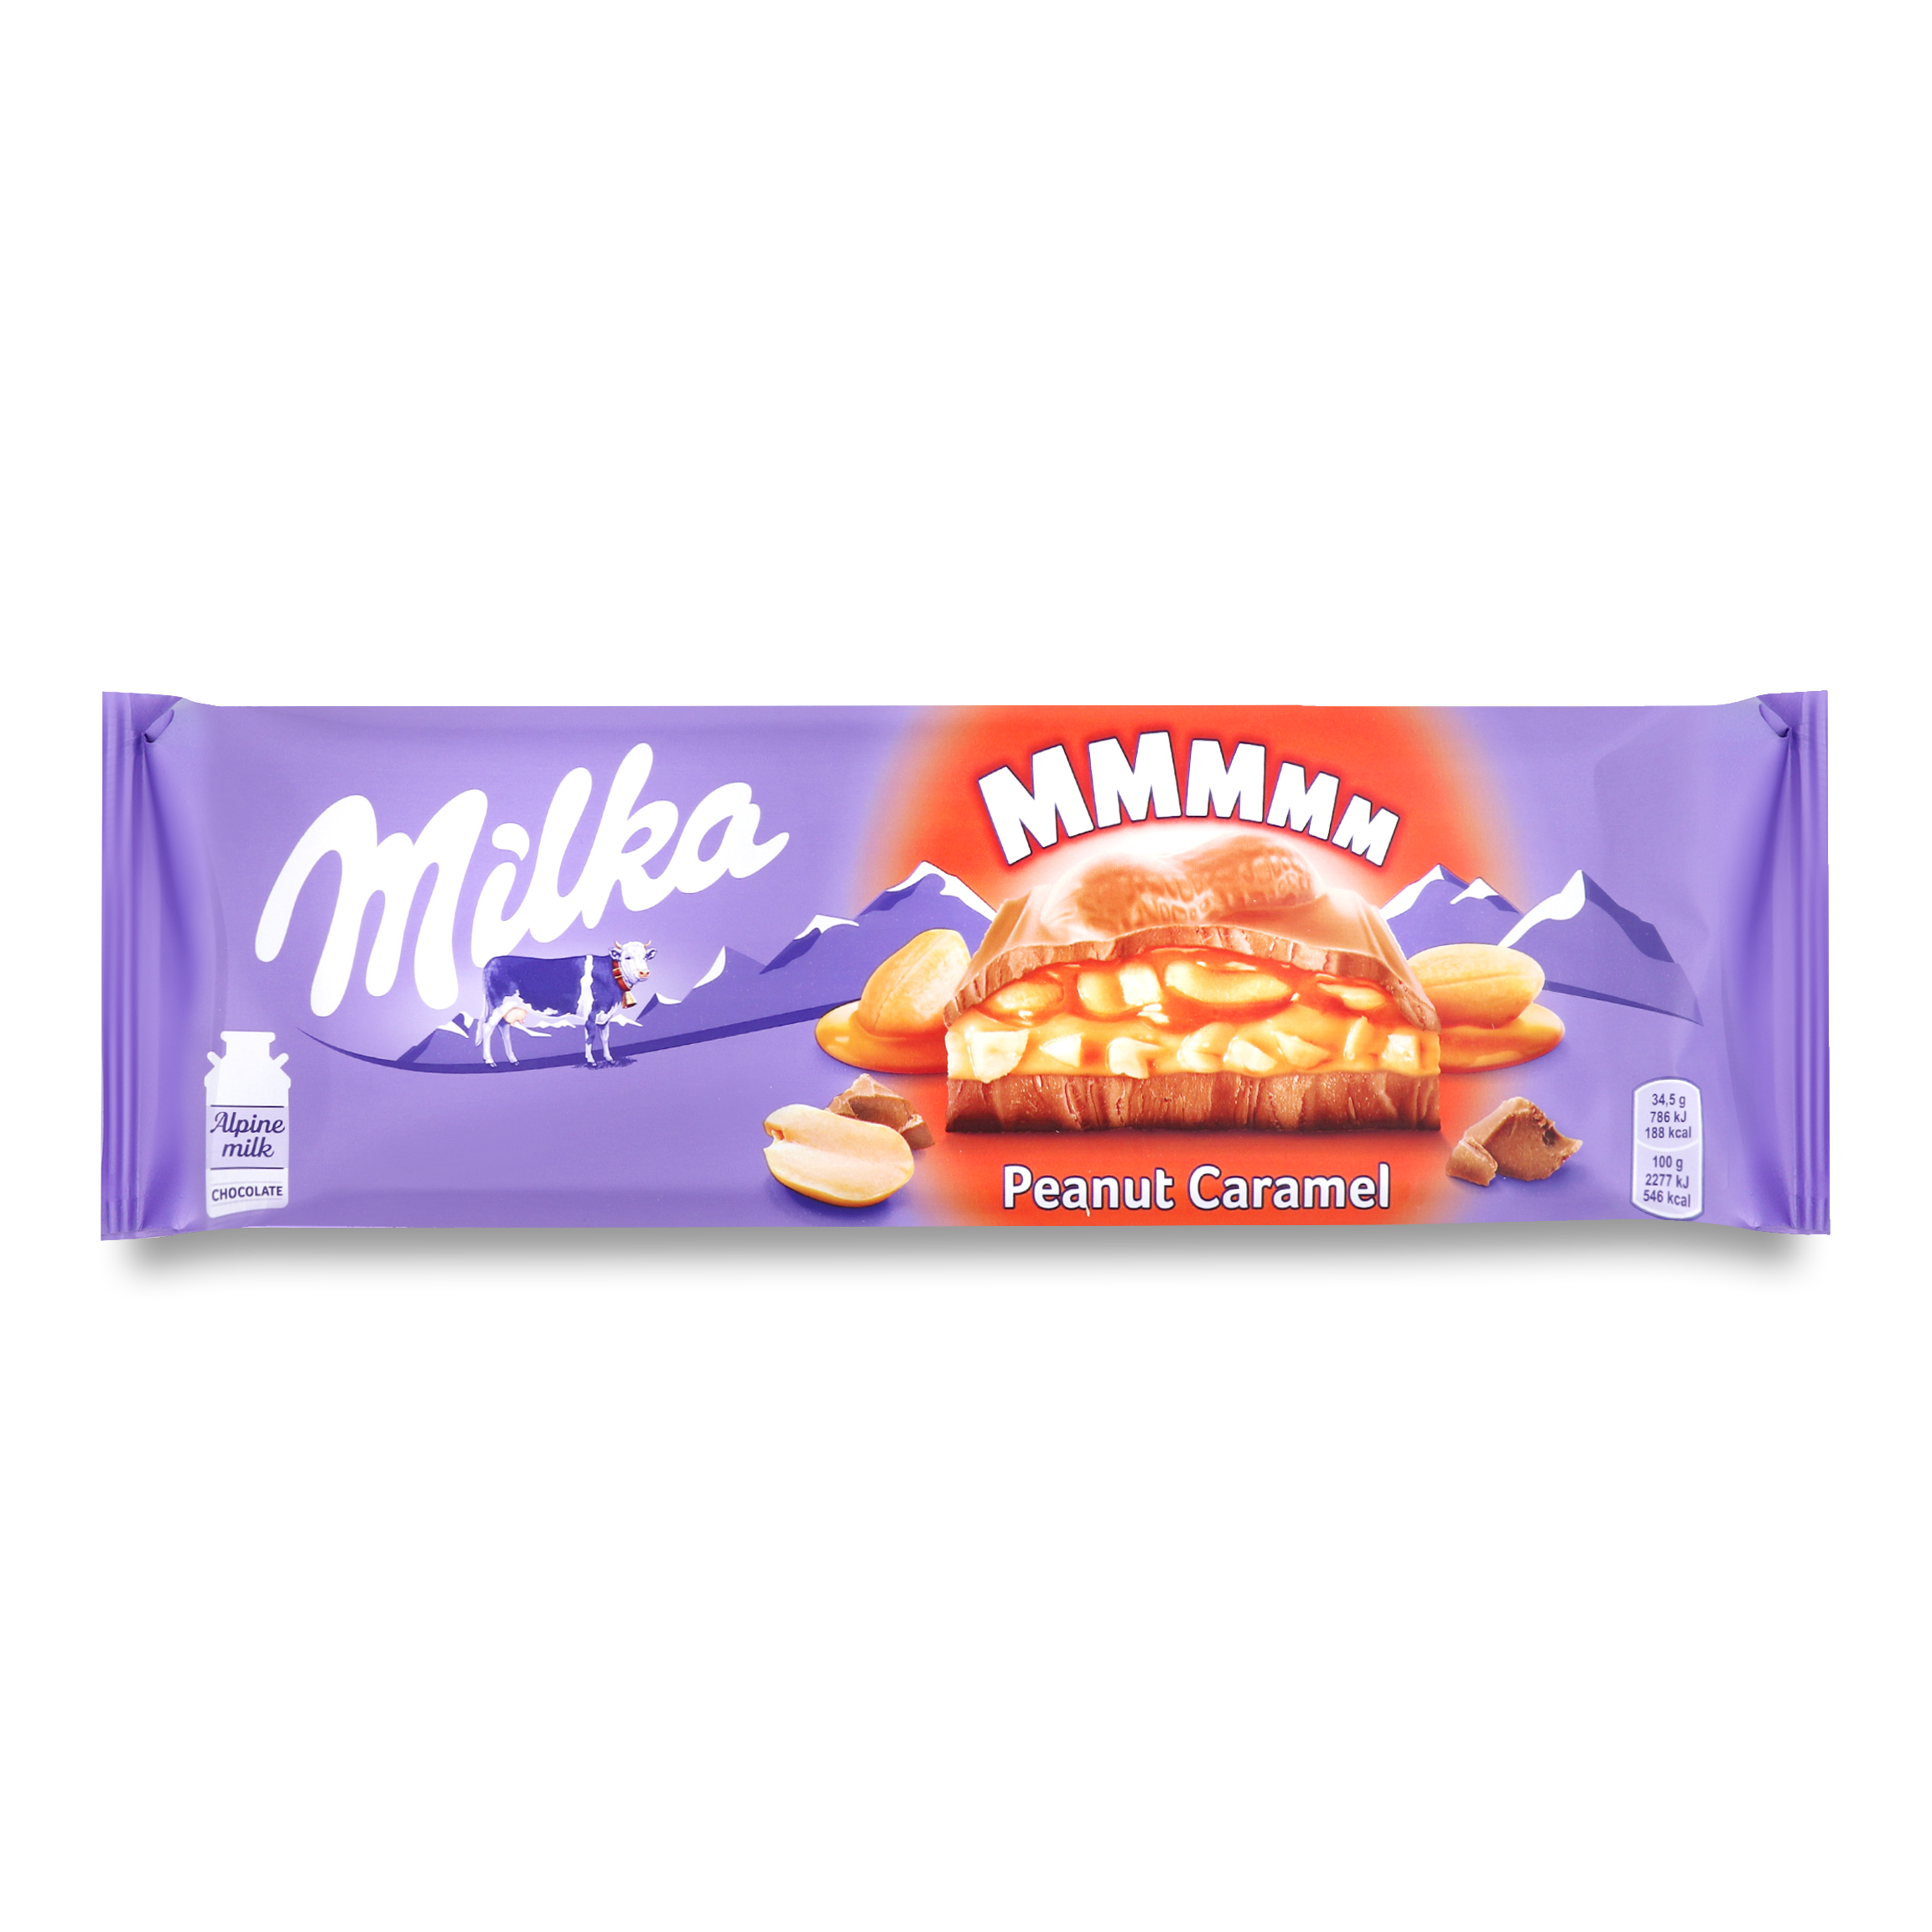 Milk Chocolate Milka with Peanuts in Caramel and Peanut Filling with Puffed Rice and Peanut Pieces 276g